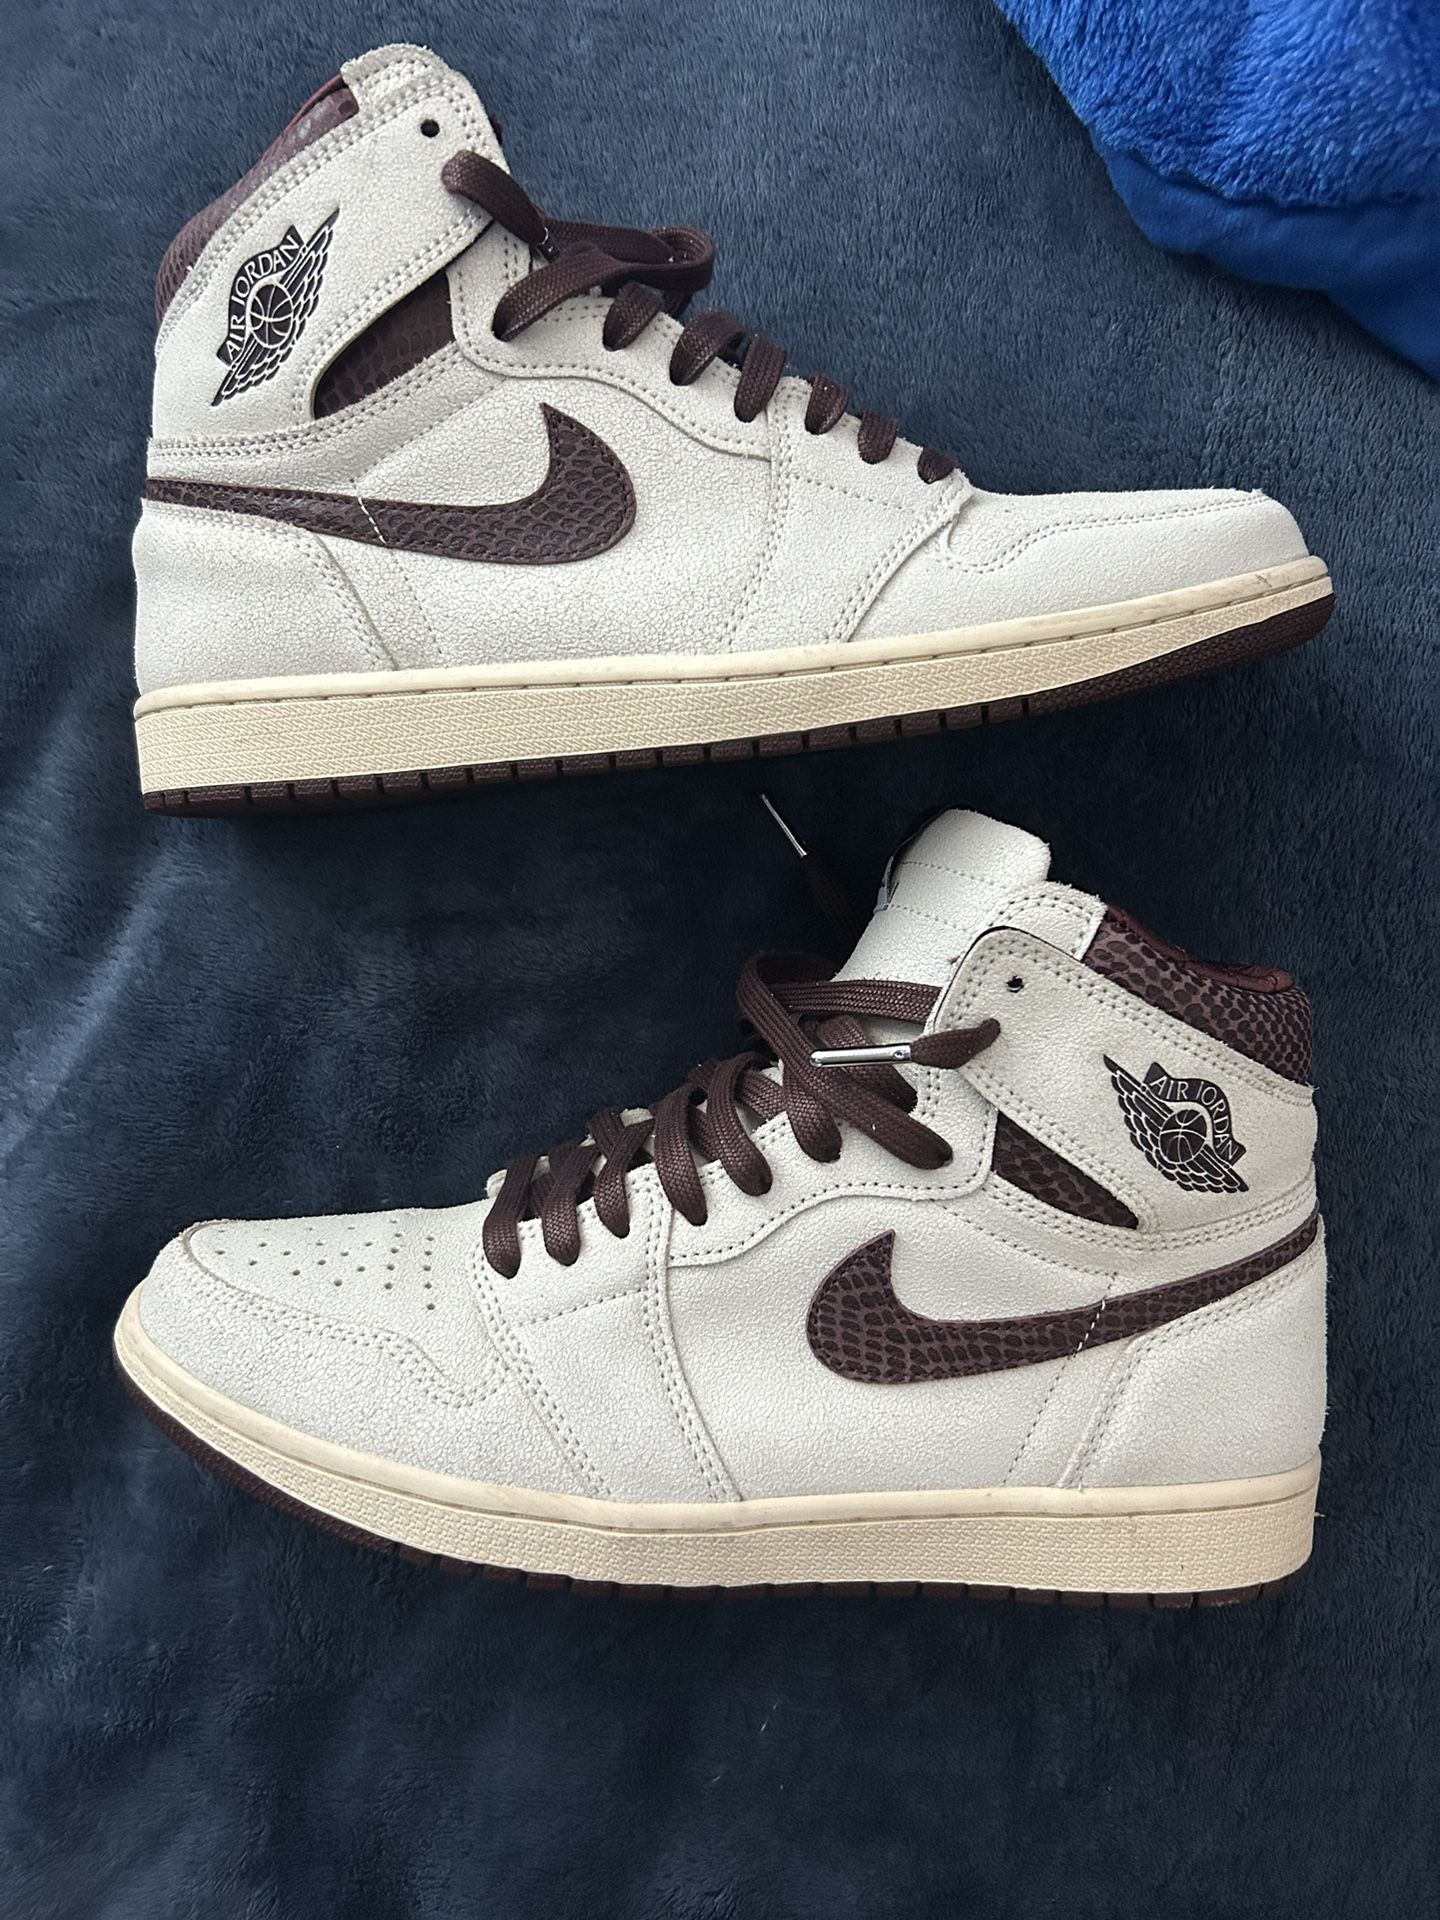 Jordan 1 High A Ma Maniére Size 11 Used 